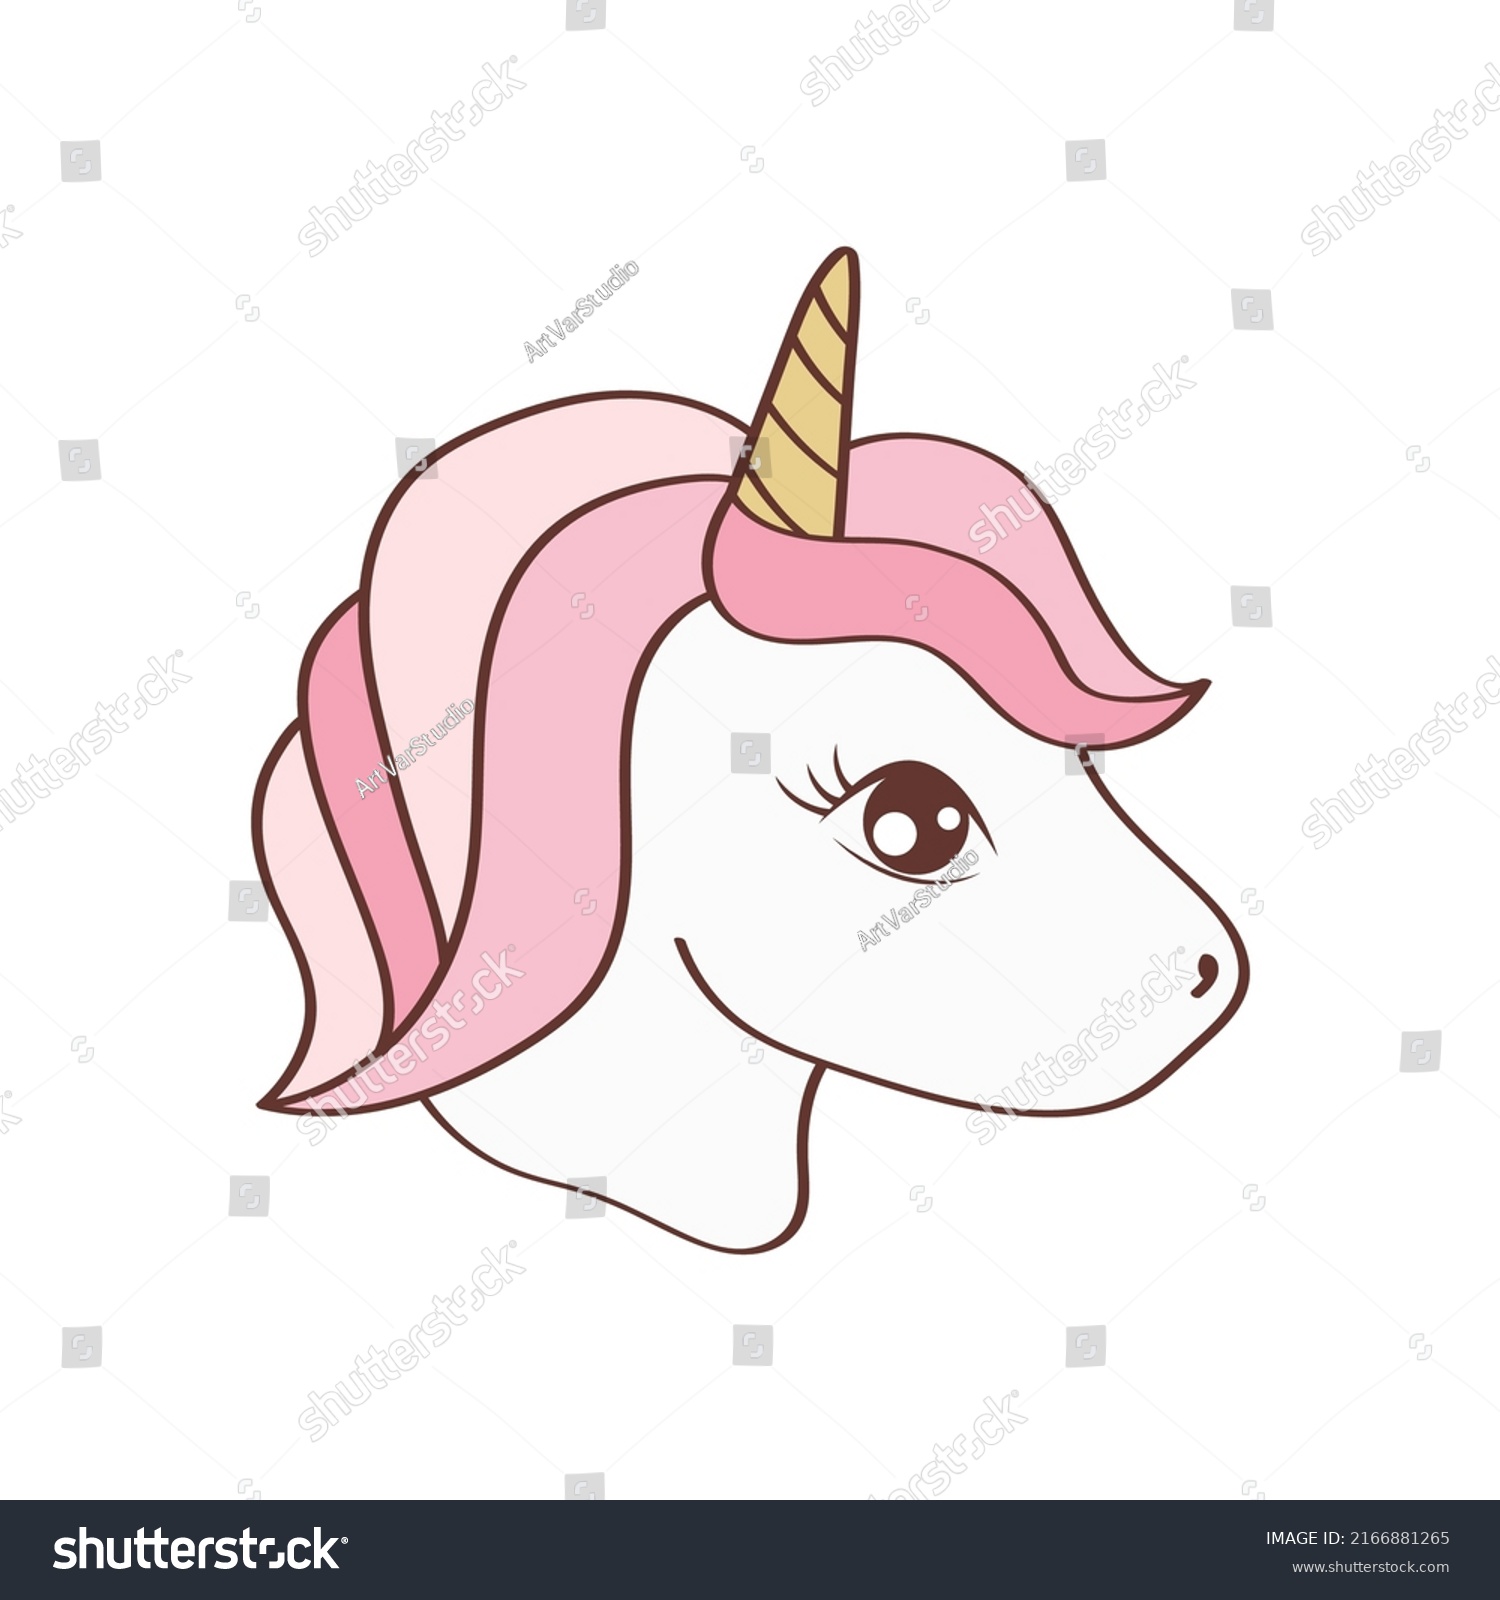 SVG of Cute Clipart Unicorn Head Illustration in Cartoon Style. Cartoon Clip Art Unicorn Face. Vector Illustration of an Animal for Stickers, Baby Shower Invitation, Prints for Clothes.  svg